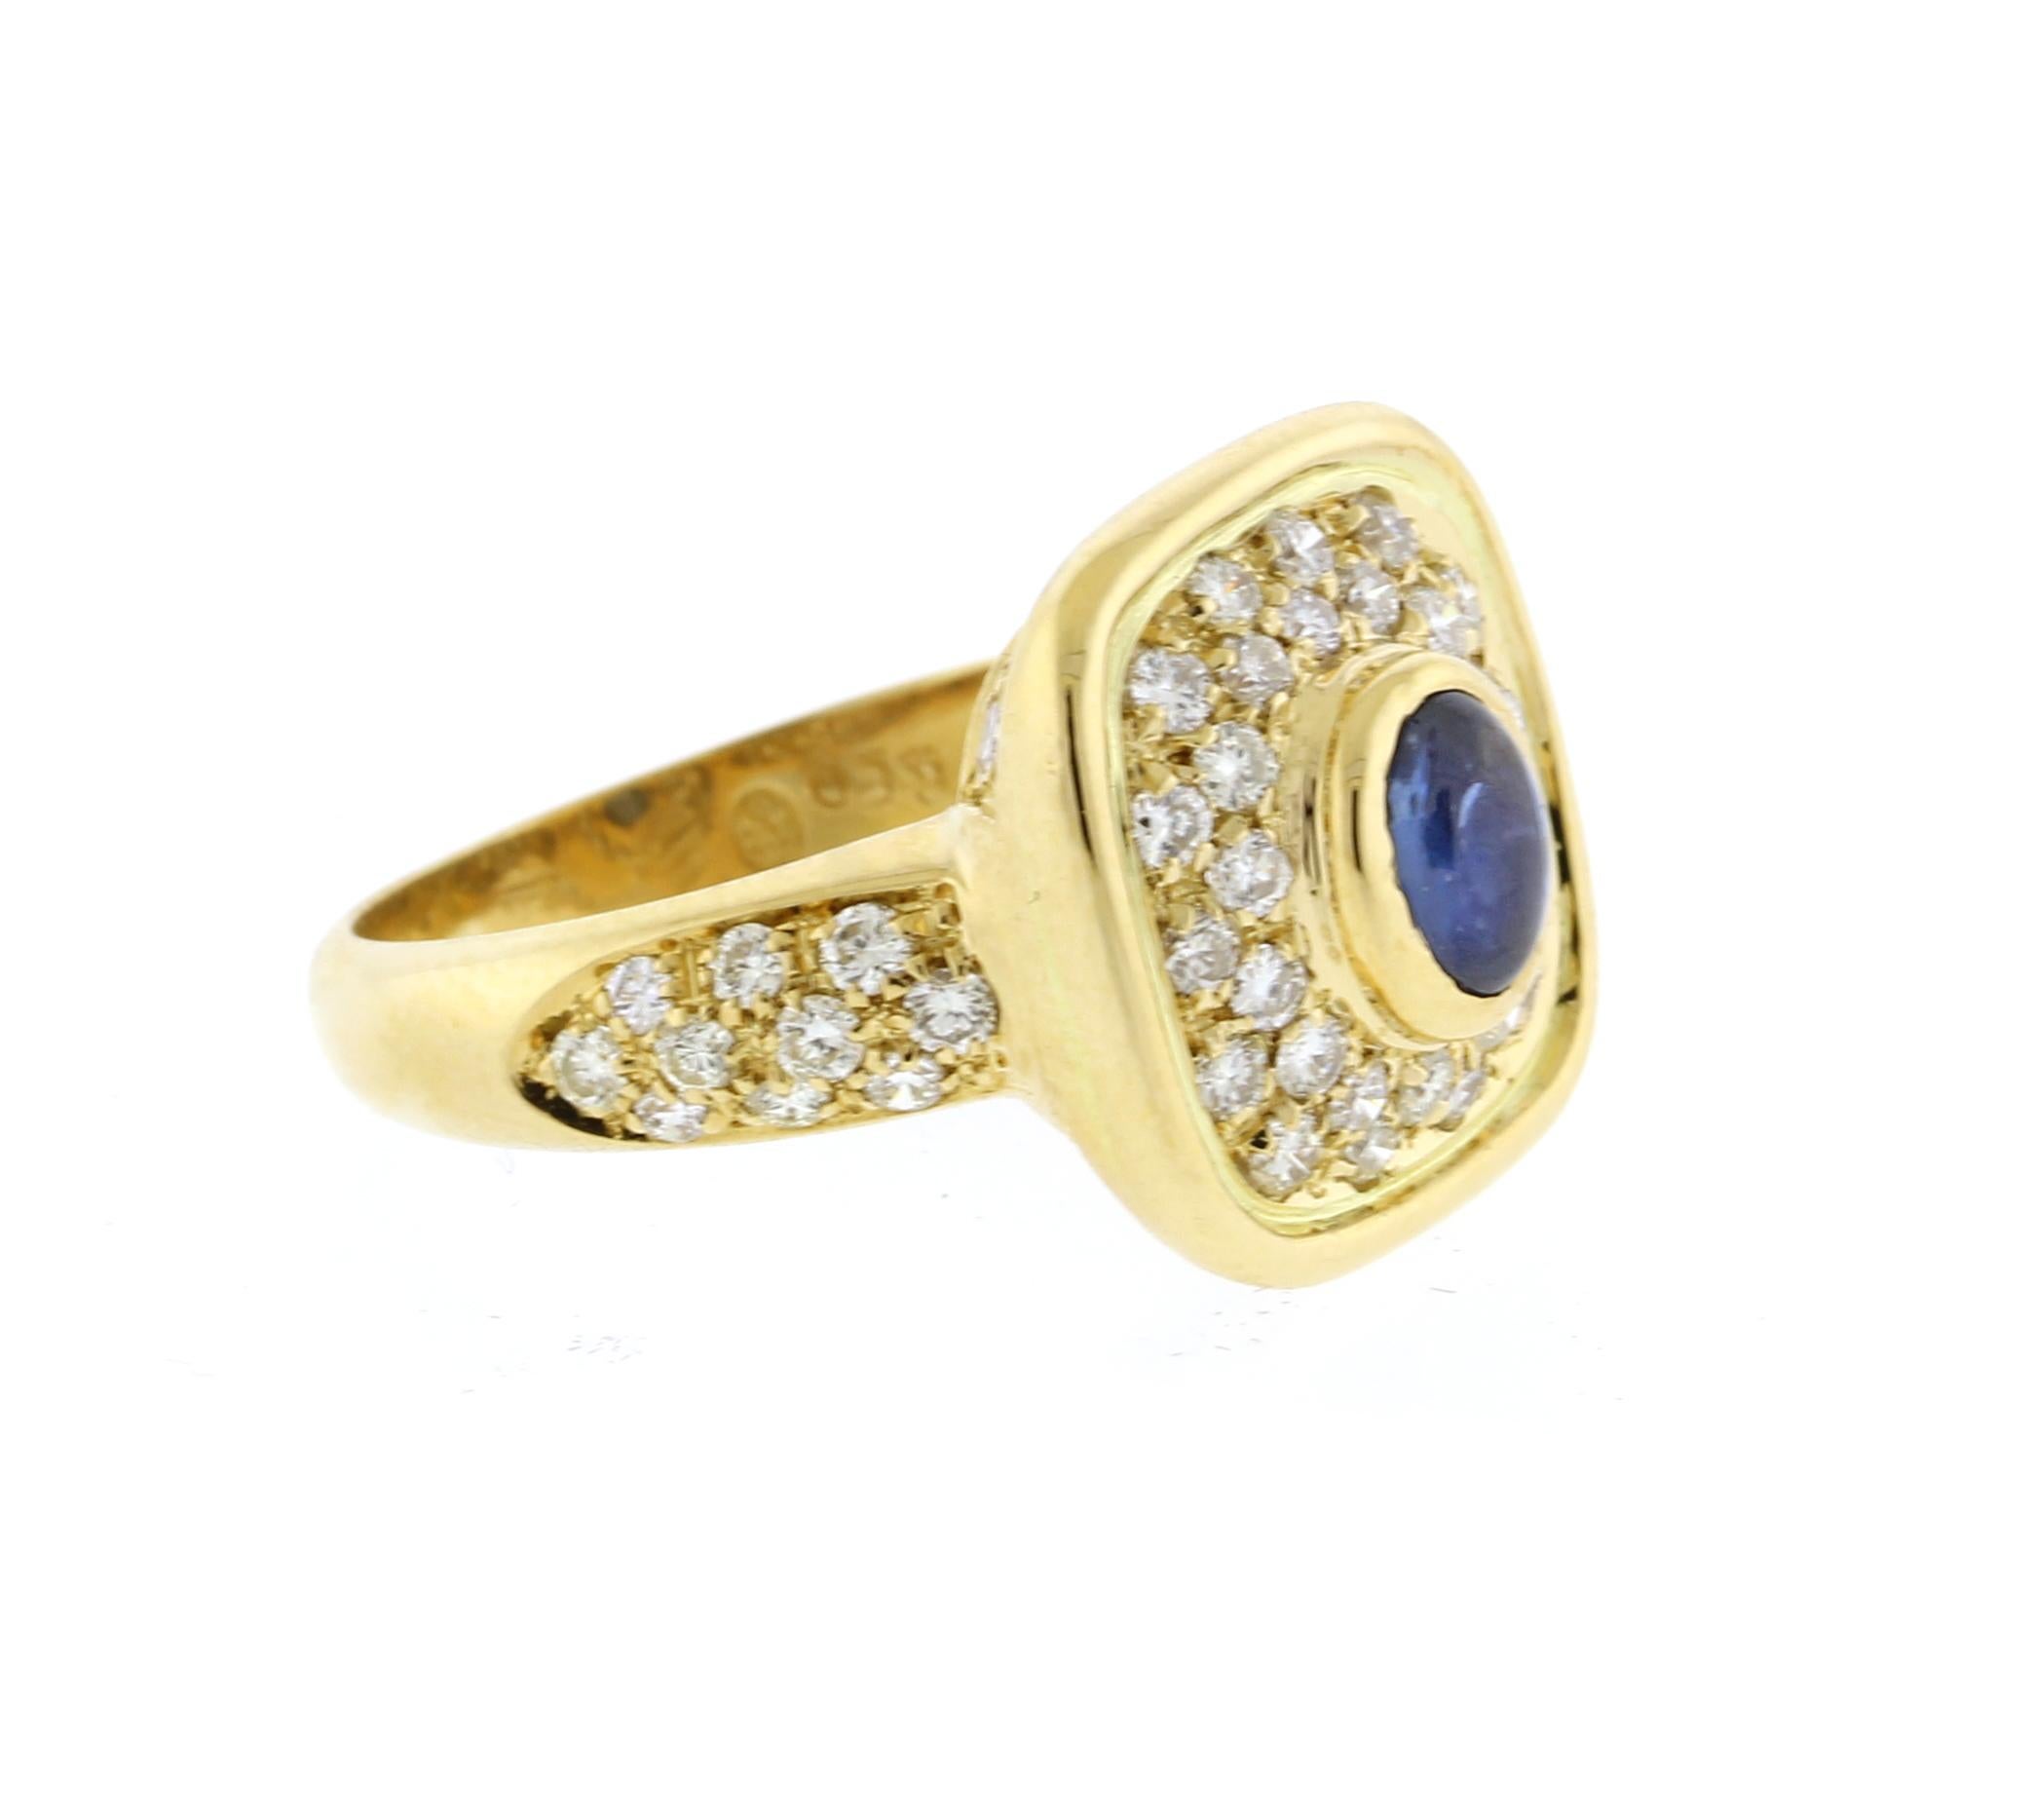 Cabochon Fred of Paris Sapphire and Diamond Gold Ring